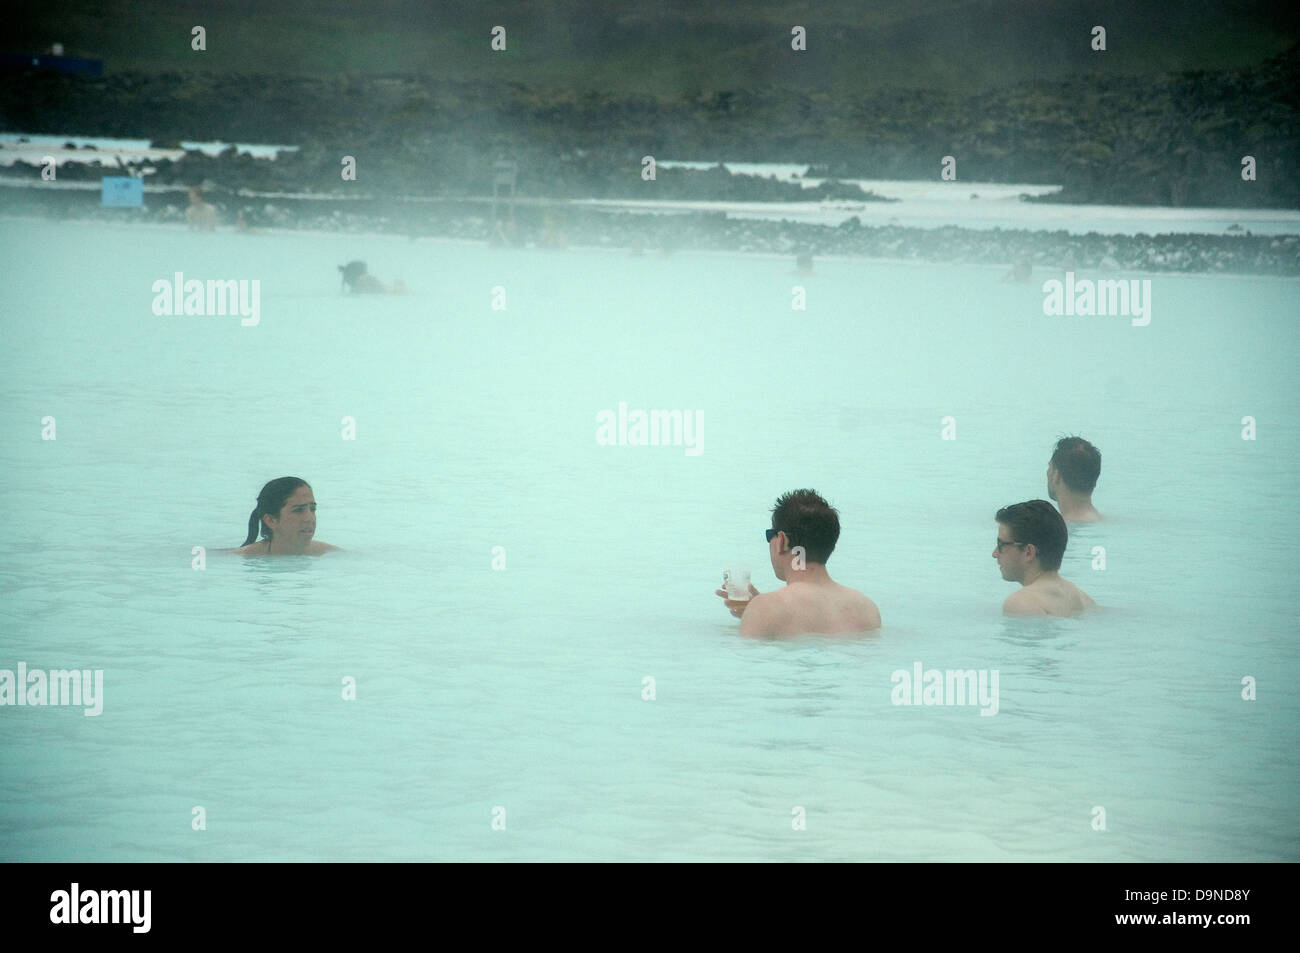 Relaxed swimmers, one with a glass in his hand, in the steamy turquoise waters of Iceland's Blue Lagoon Stock Photo